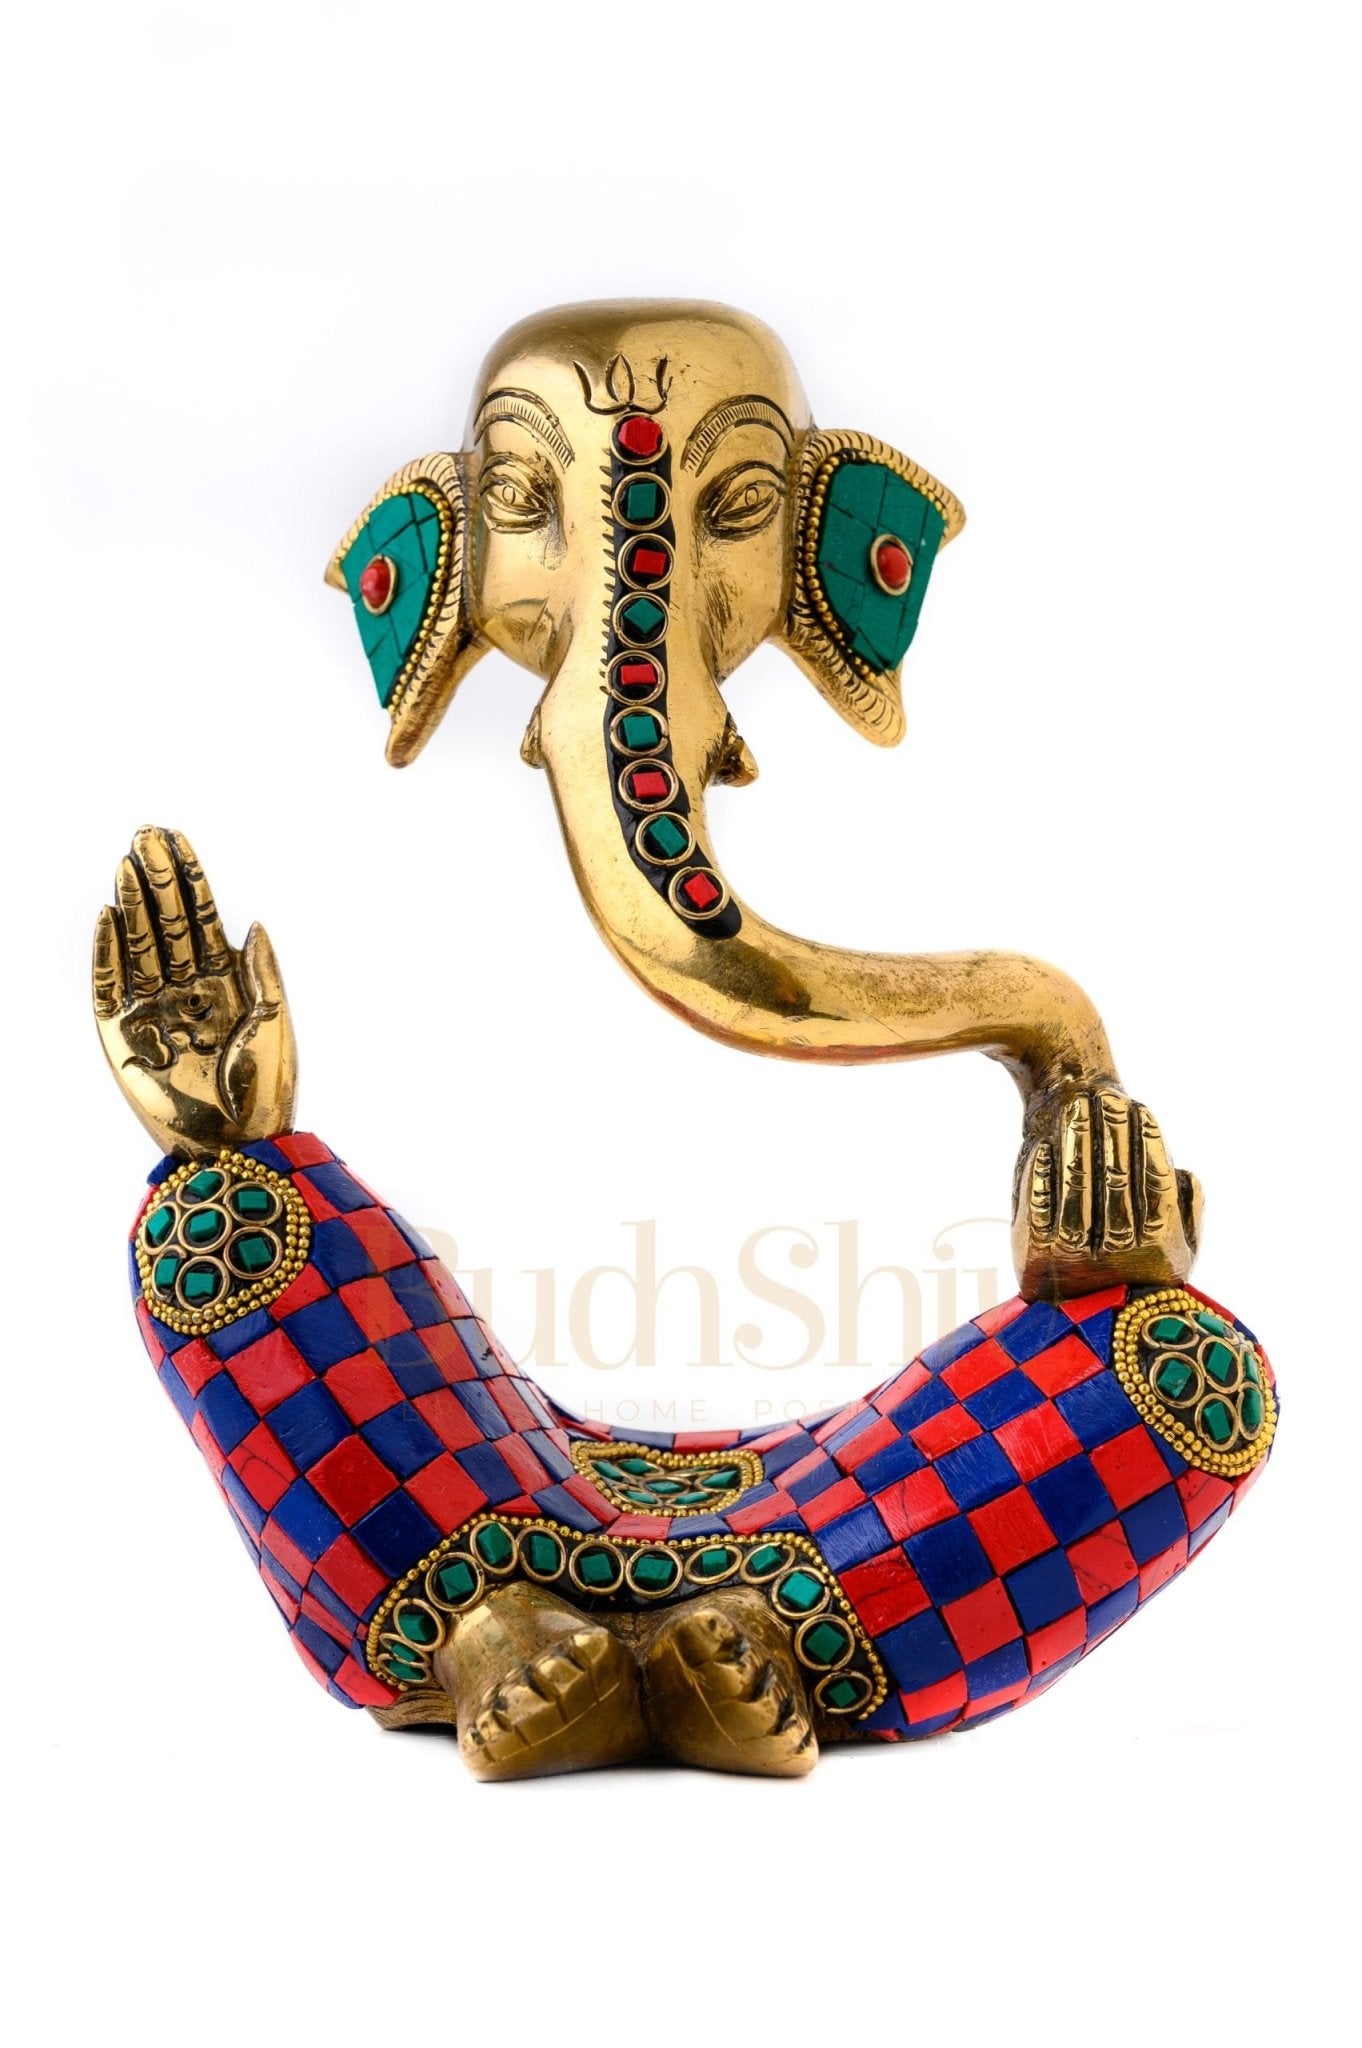 Handcrafted Brass Lord Ganesha Idol with Natural Stones | Height 8.5 inches - Budhshiv.com